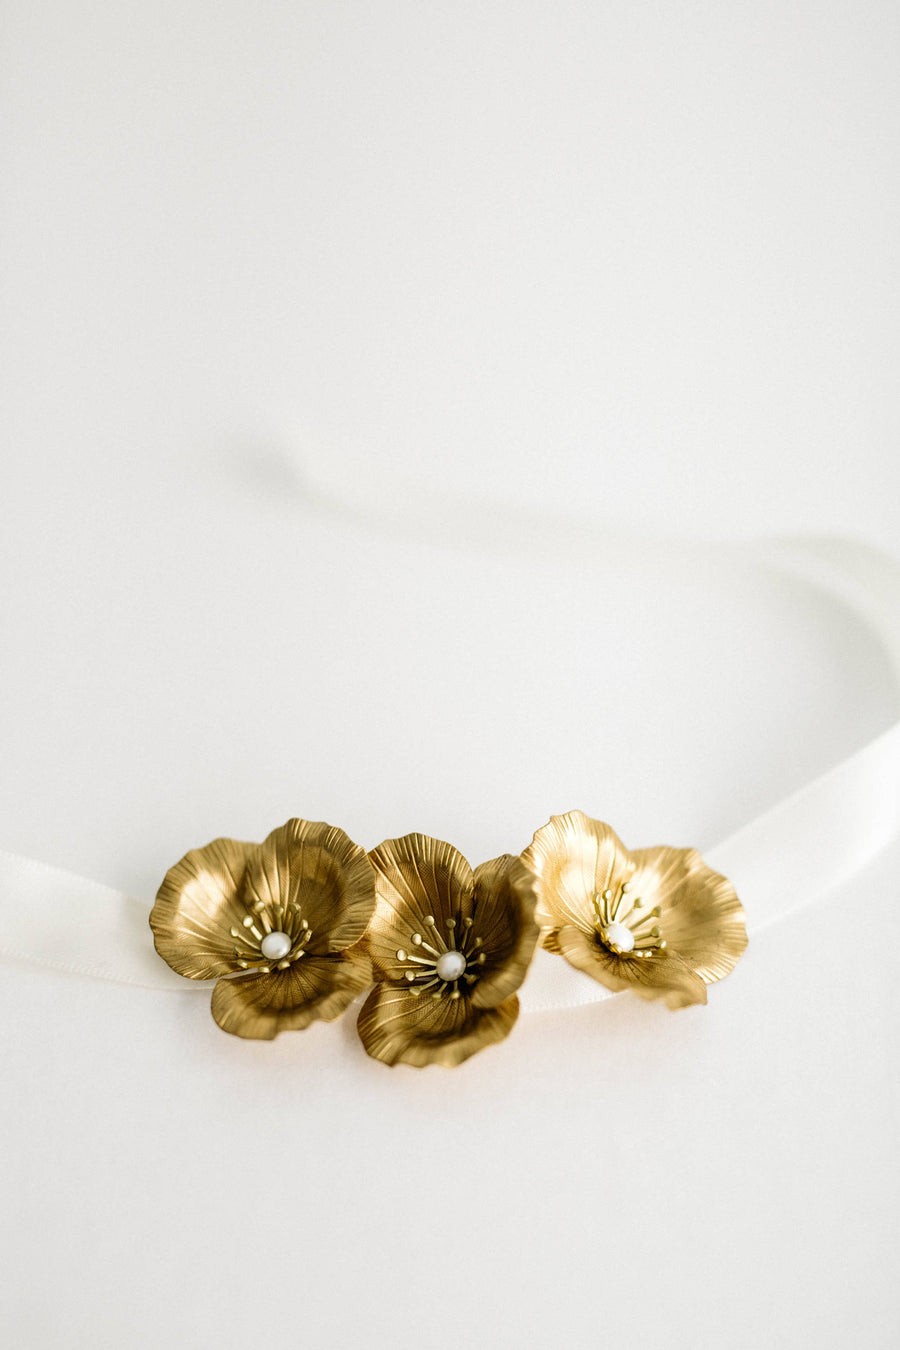 Bride wearing a bracelet made of three gold flowers